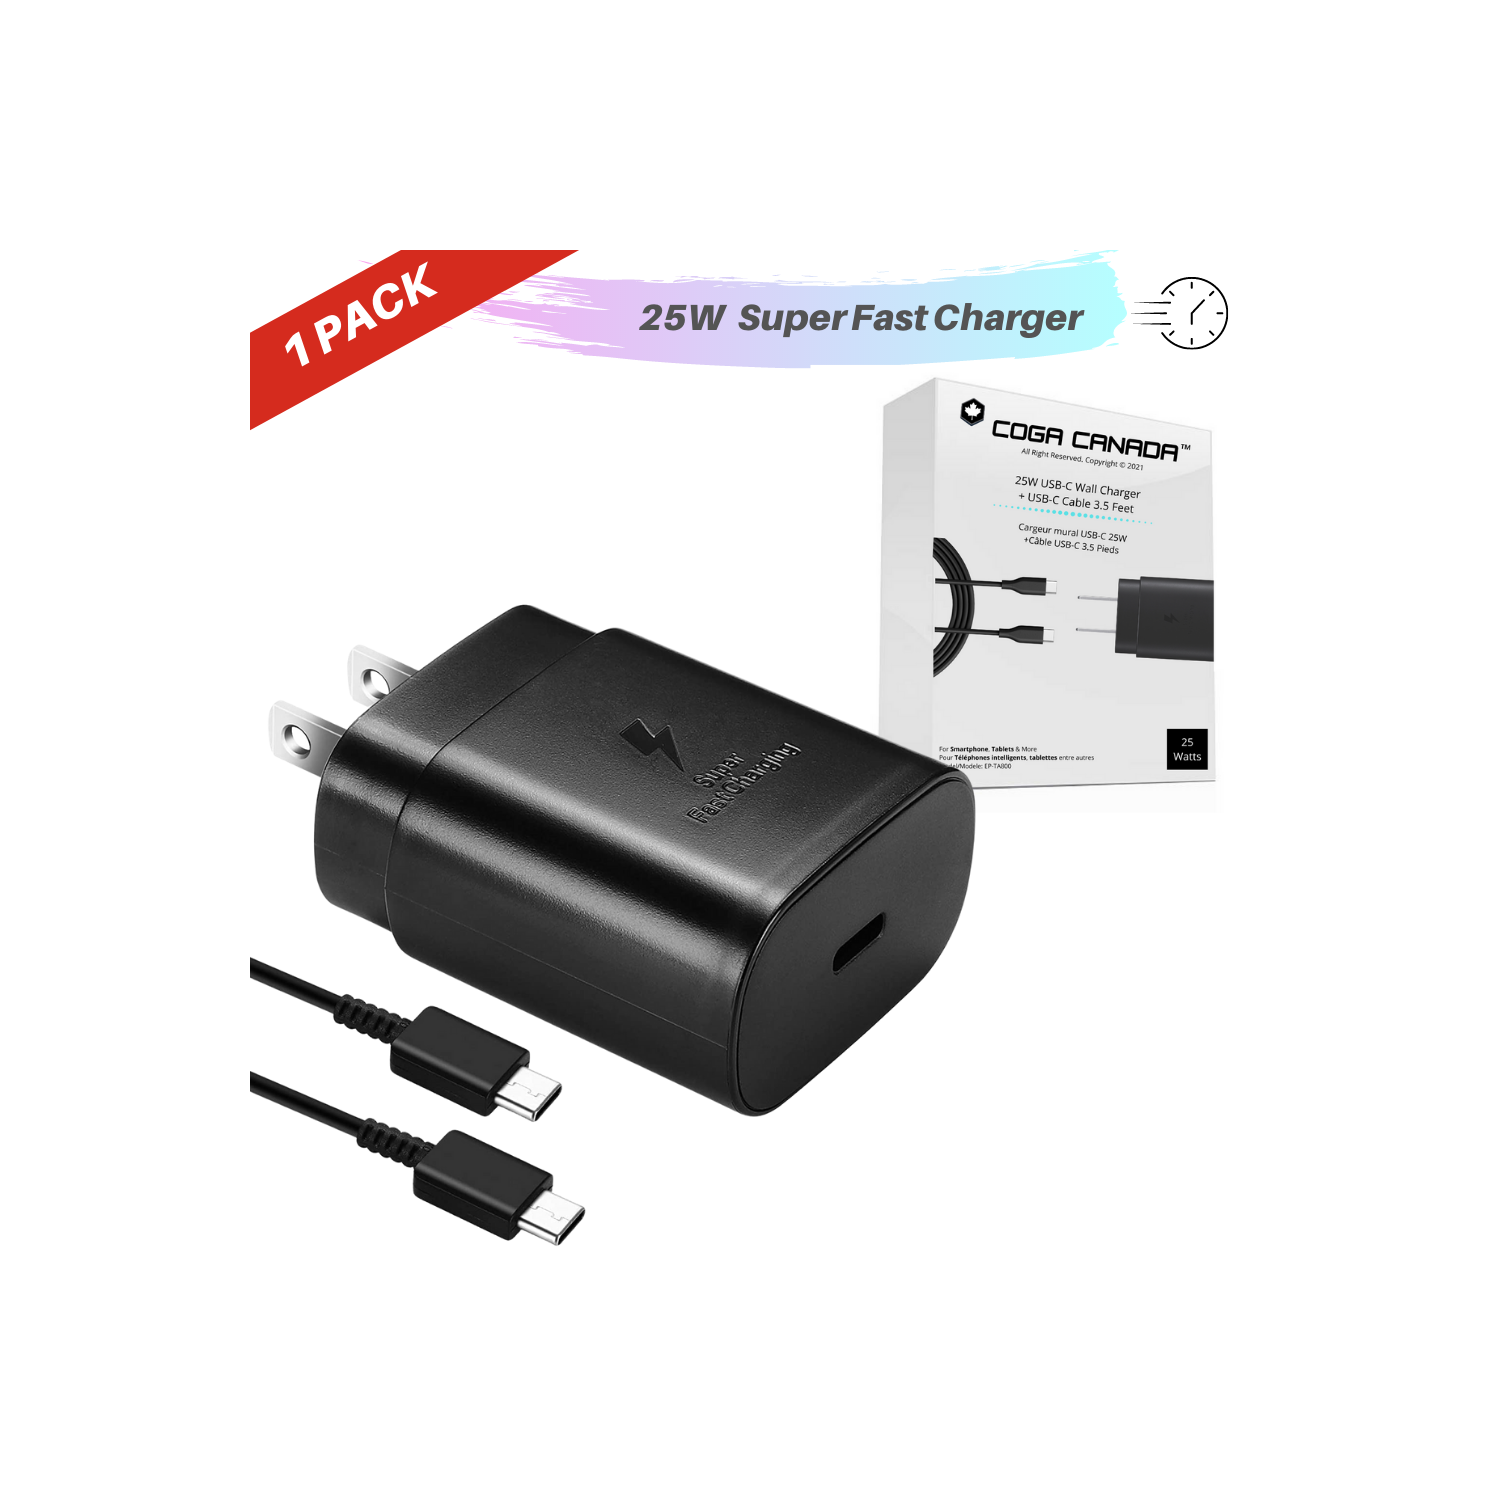 COGA Canada - 25W Super Fast Wall Charger + USB-C 3.5 Cable Samsung Galaxy S20/S21/S21+/S21Ultra/S10 5G /Note 10/Note 10 Plus/Note 20/S9 S8/S10e,iPad Pro 12.9/11,Google Pixel 3a 4 3 2 XL